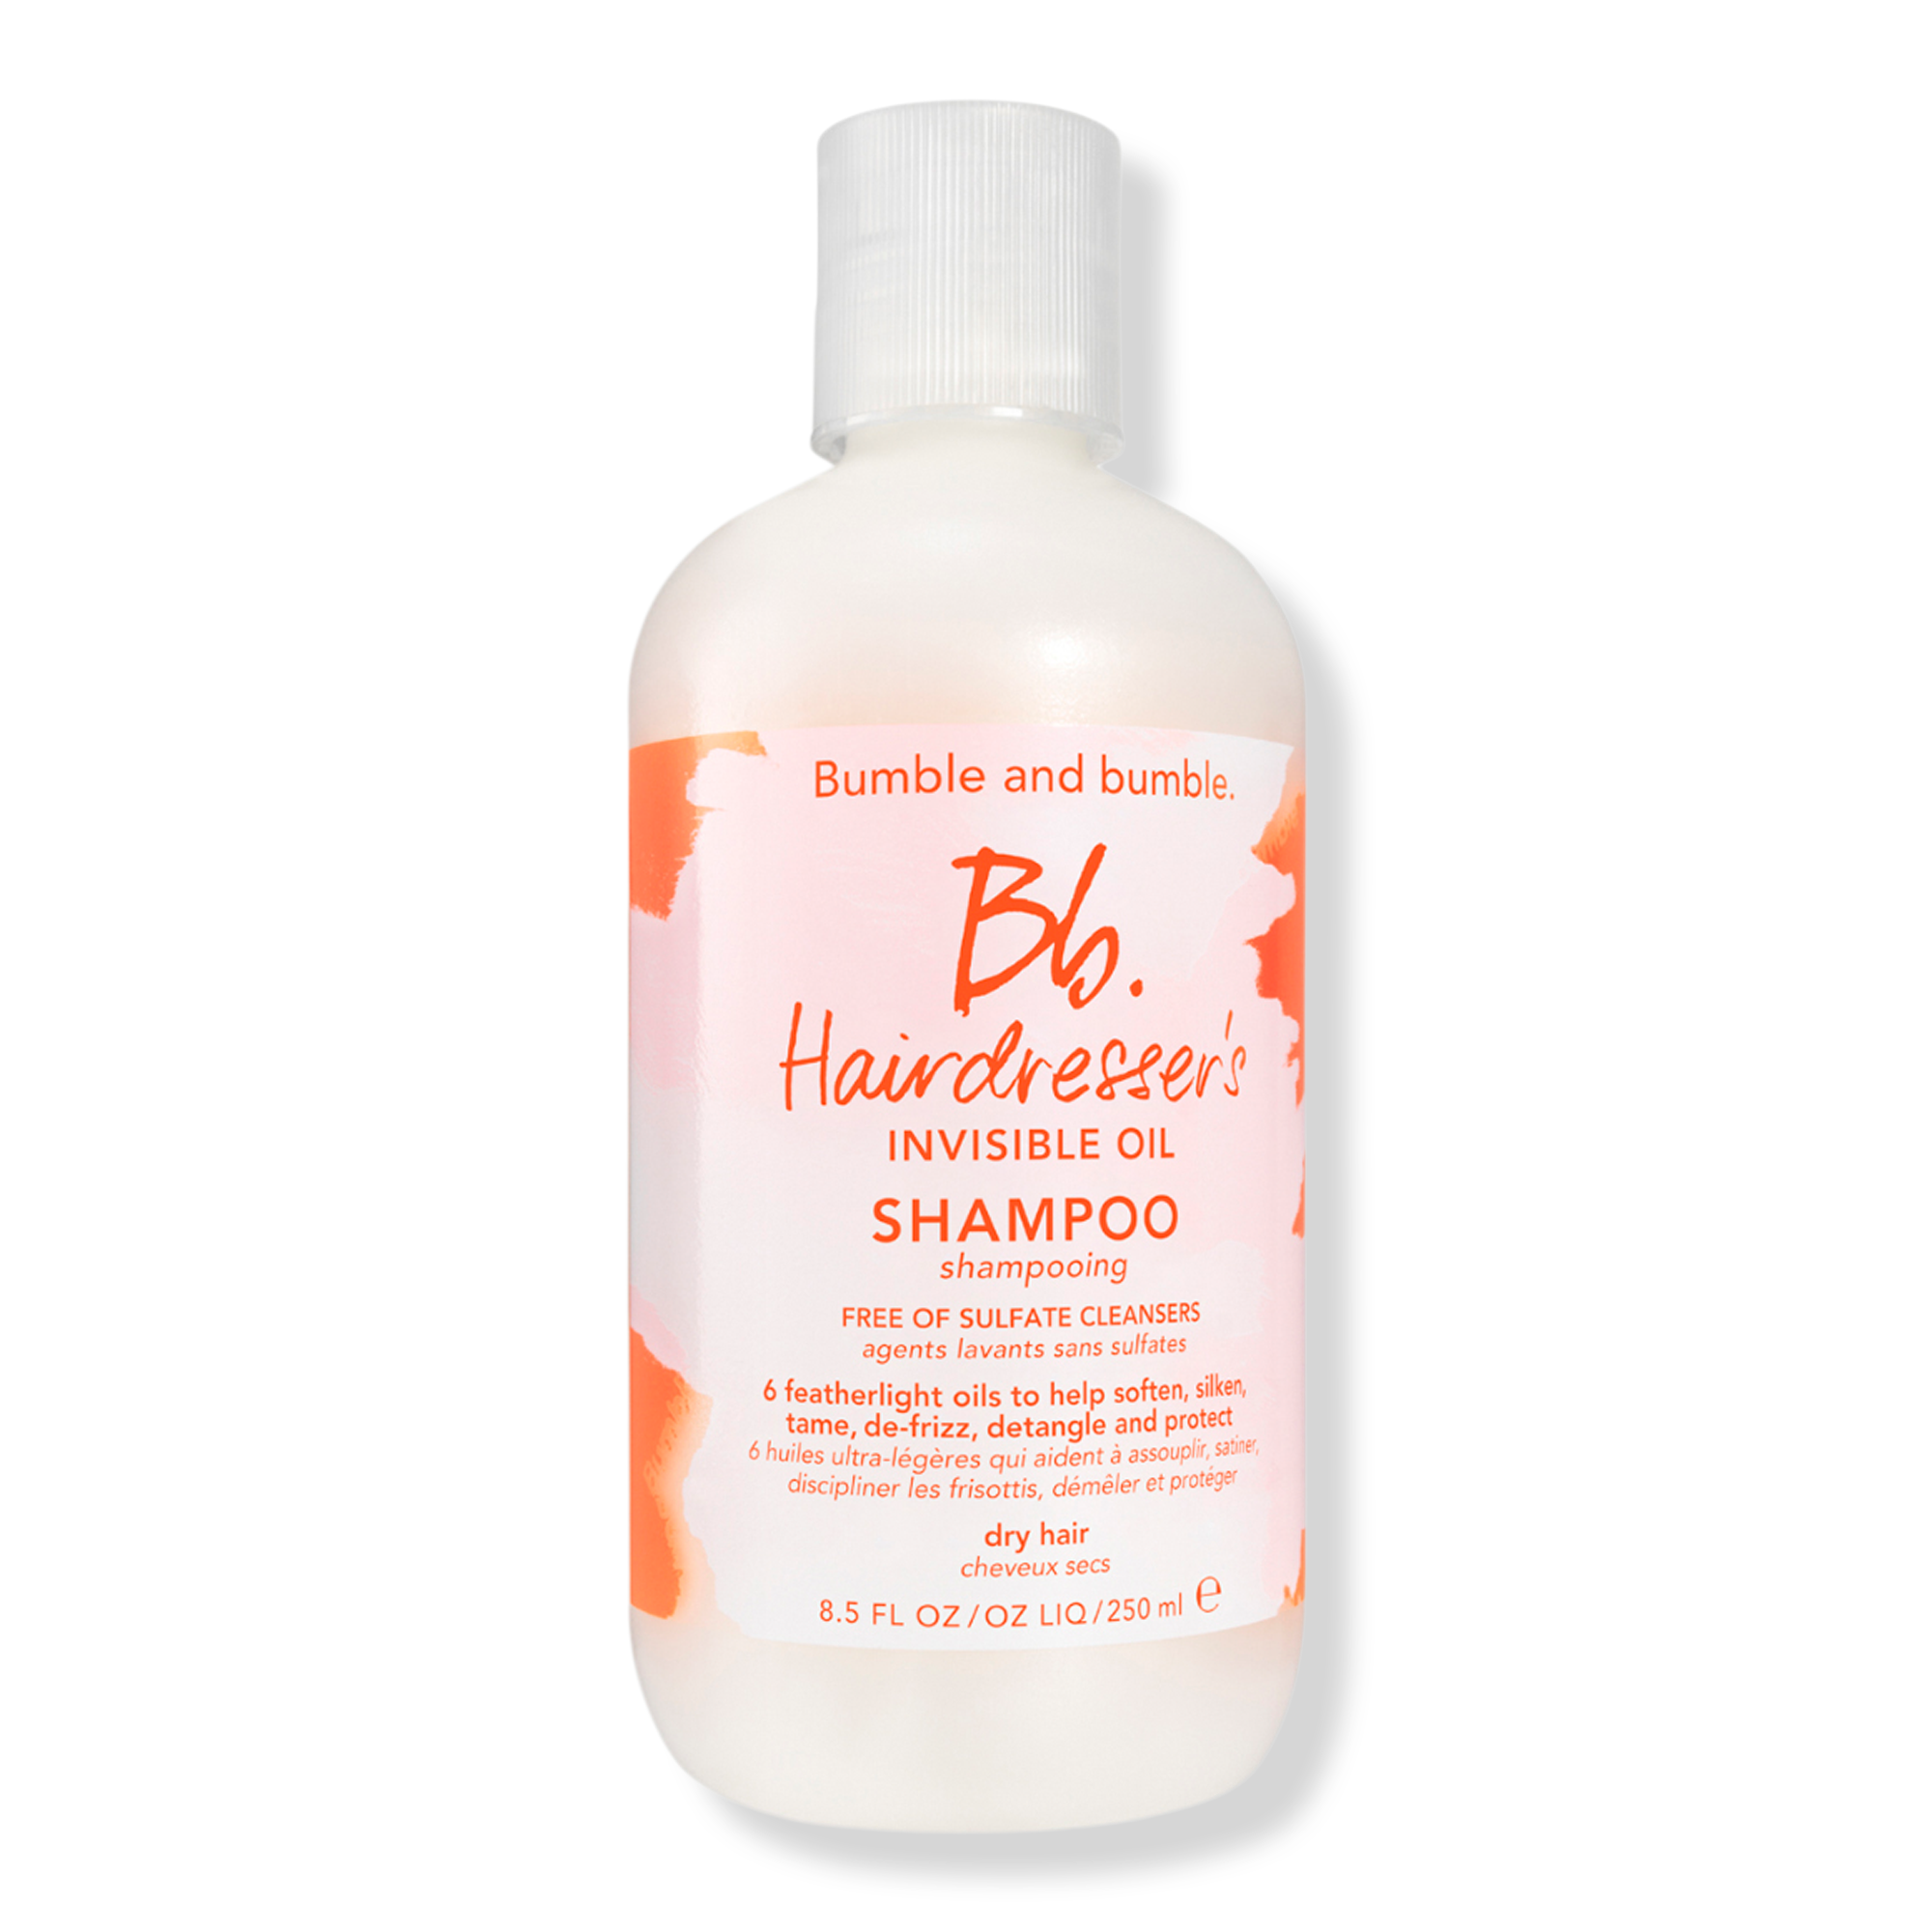 Bumble and bumble Hairdresser's Invisible Oil Shampoo / 8OZ